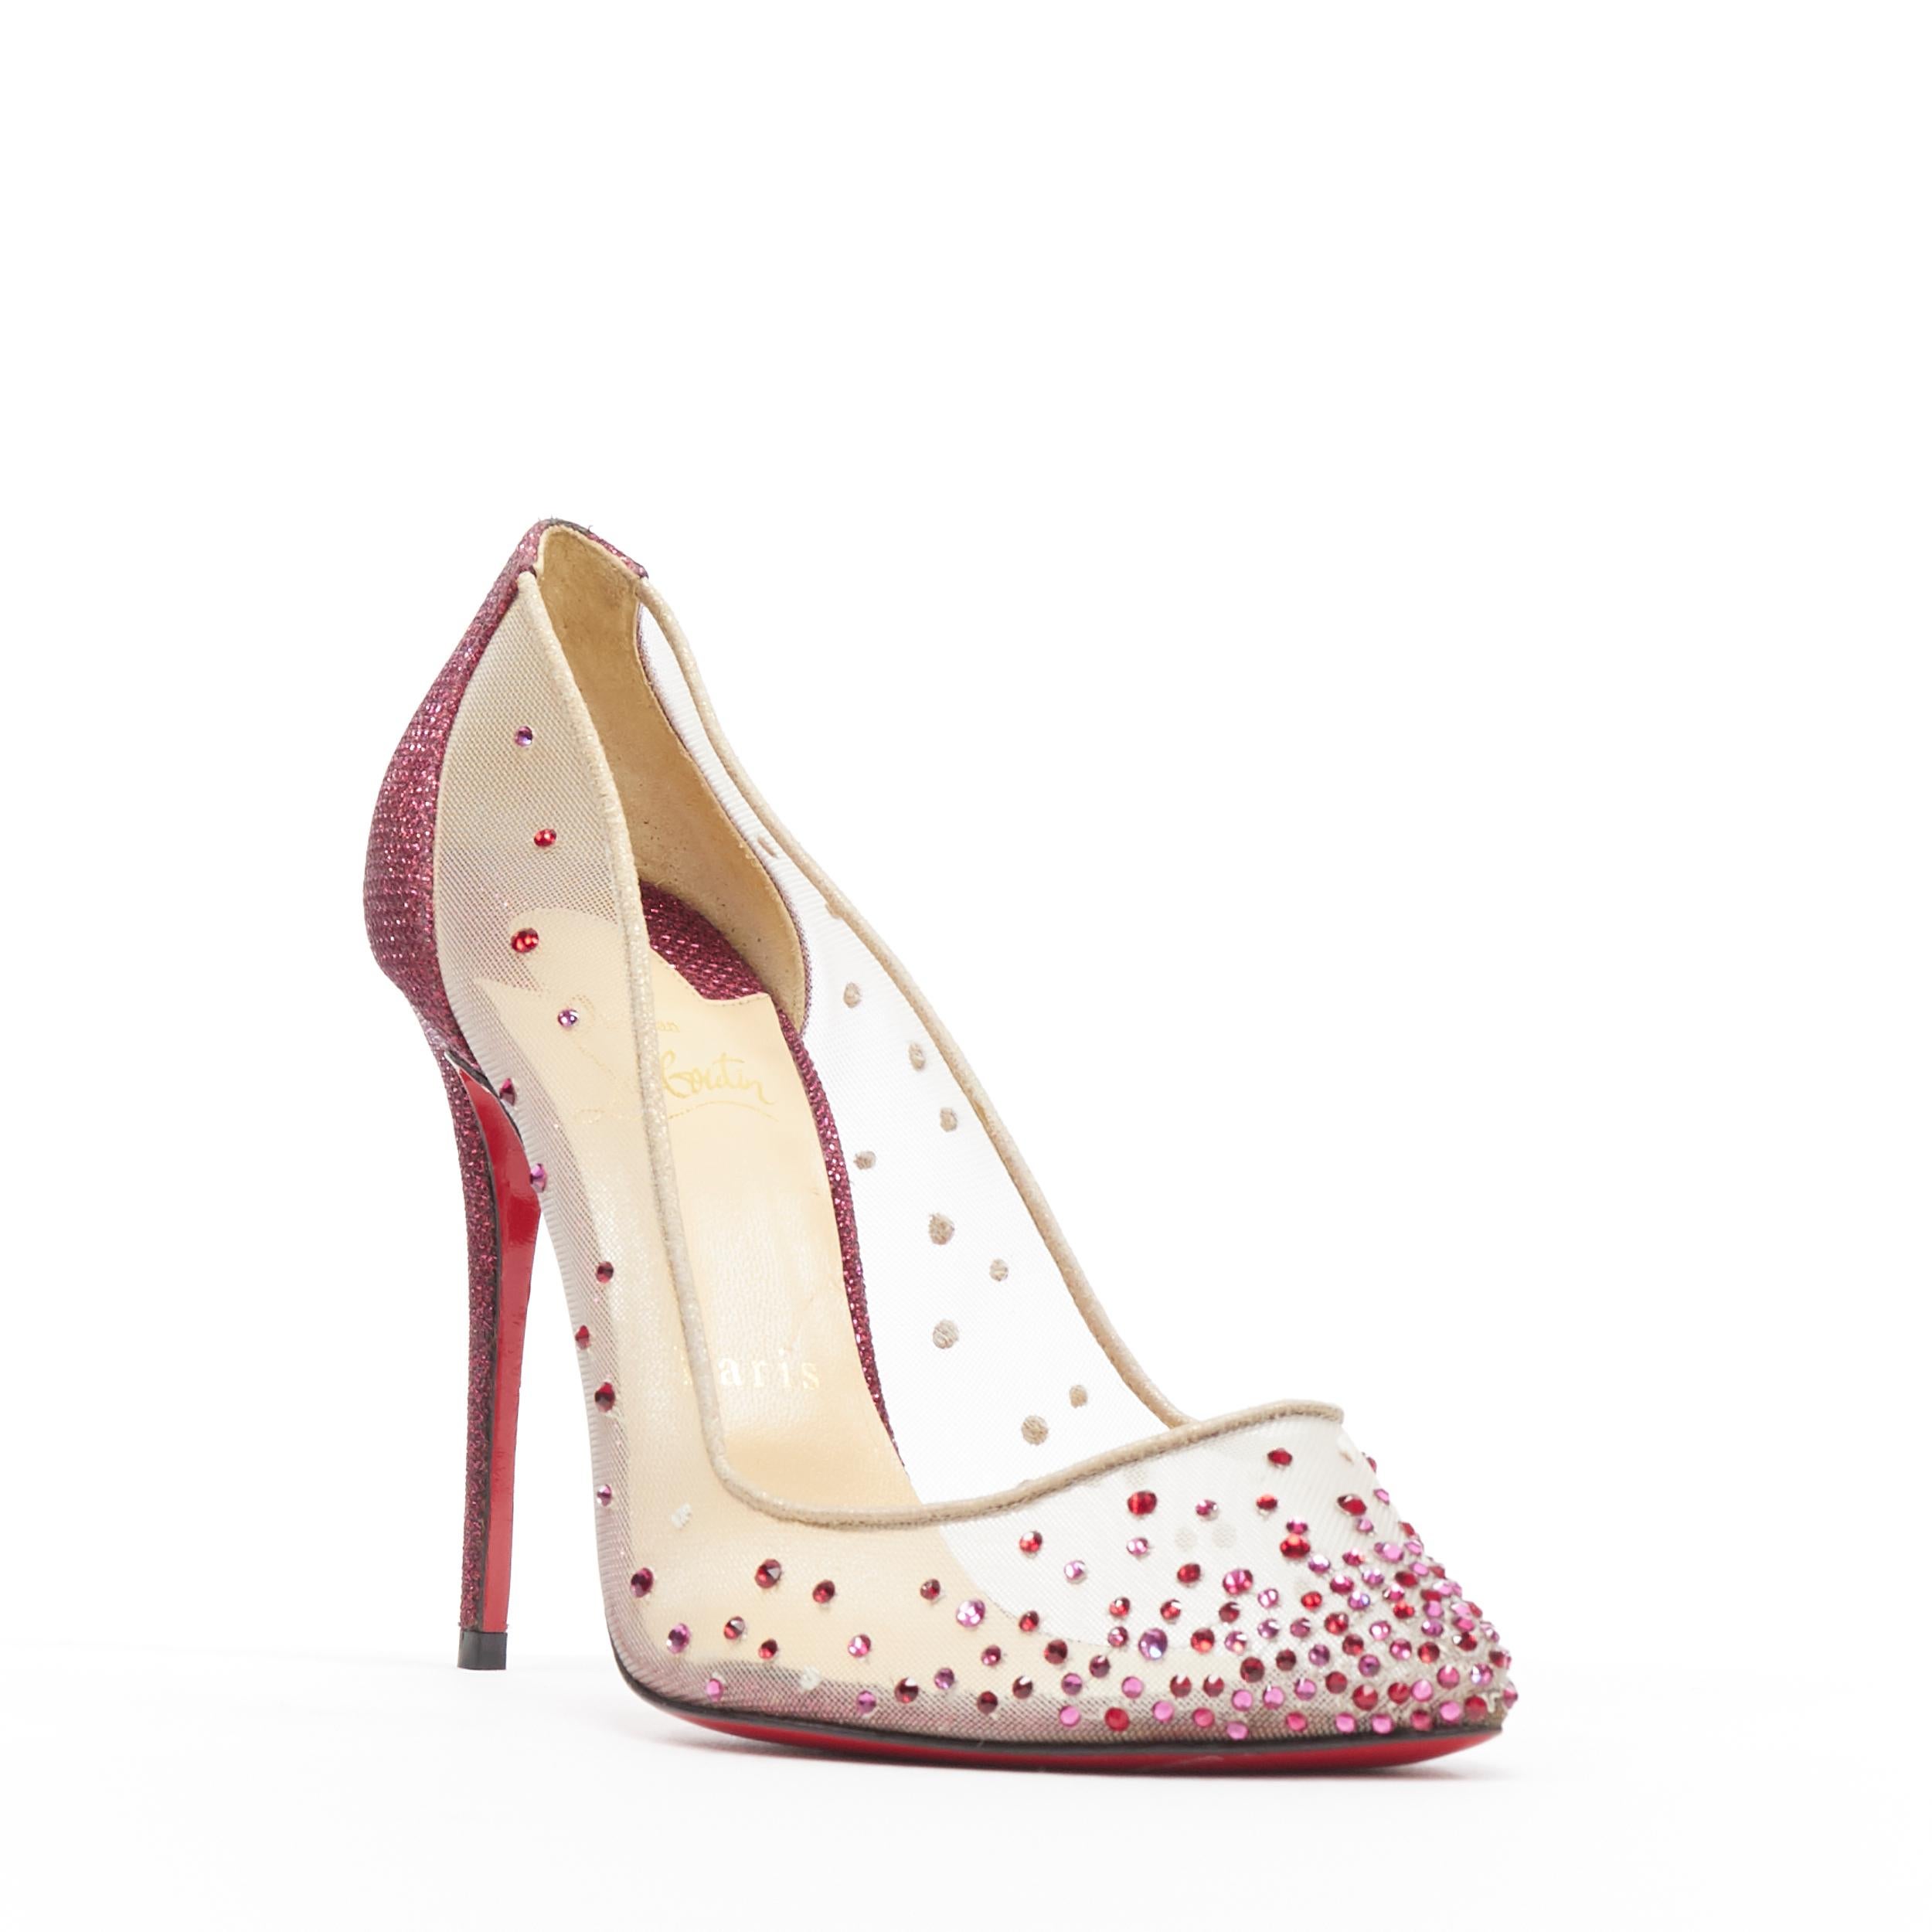 CHRISTIAN LOUBOUTIN Follies Strass red glitter crystal nude mesh heels EU36.5
Brand: Christian Louboutin
Designer: Christian Louboutin
Model Name / Style: Follie Strass 
Material: Fabric
Color: Pink
Pattern: Solid
Extra Detail: Follies Strass 100.